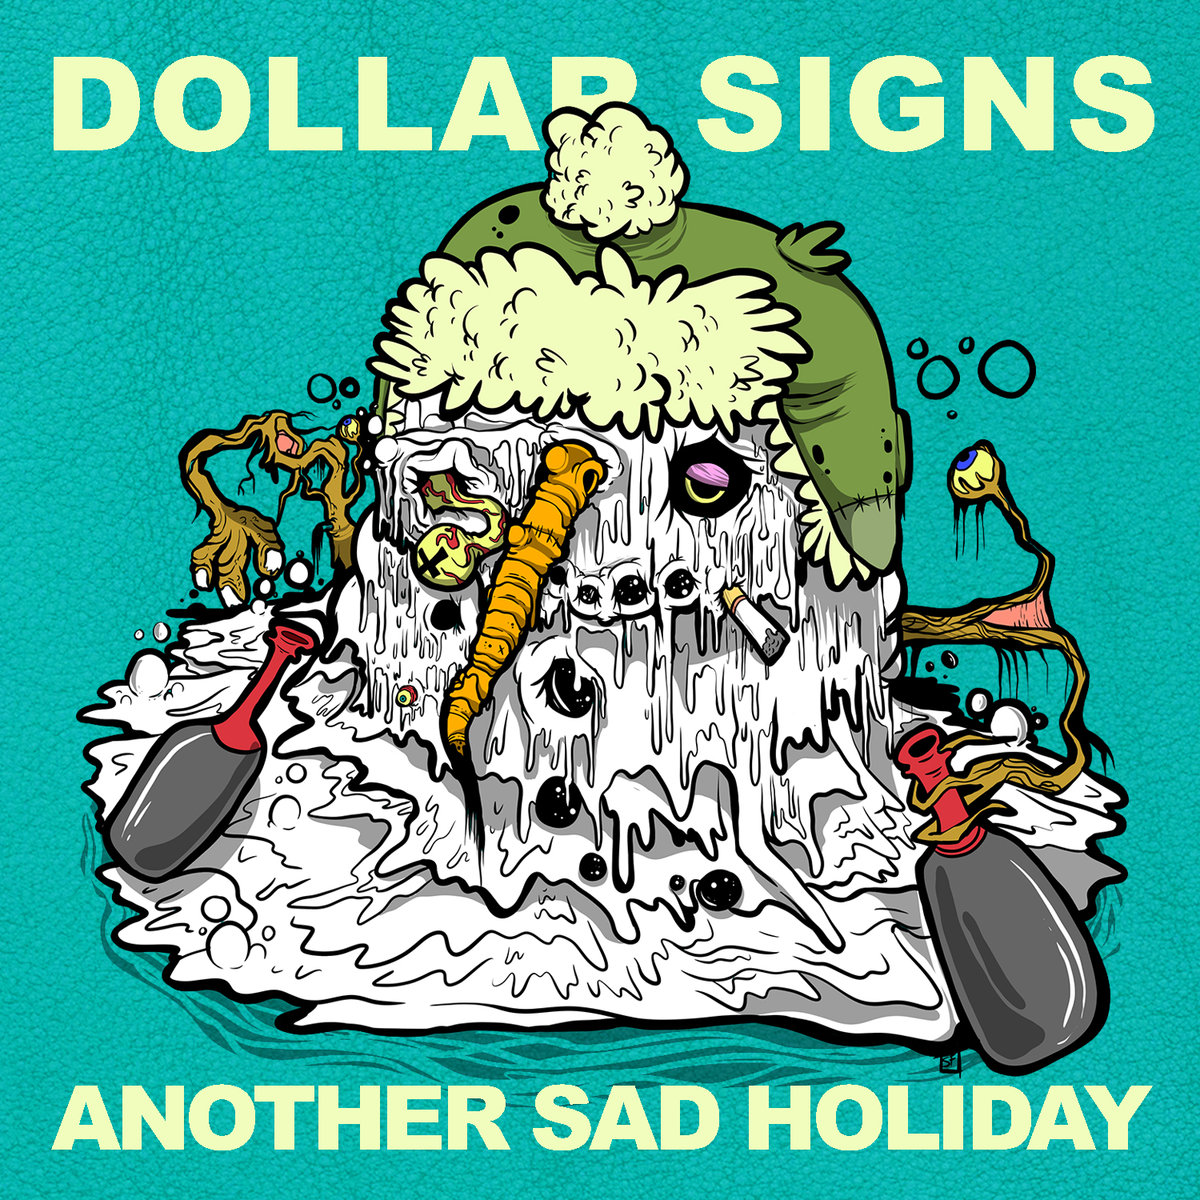 Dollar Signs - Another Sad Holiday